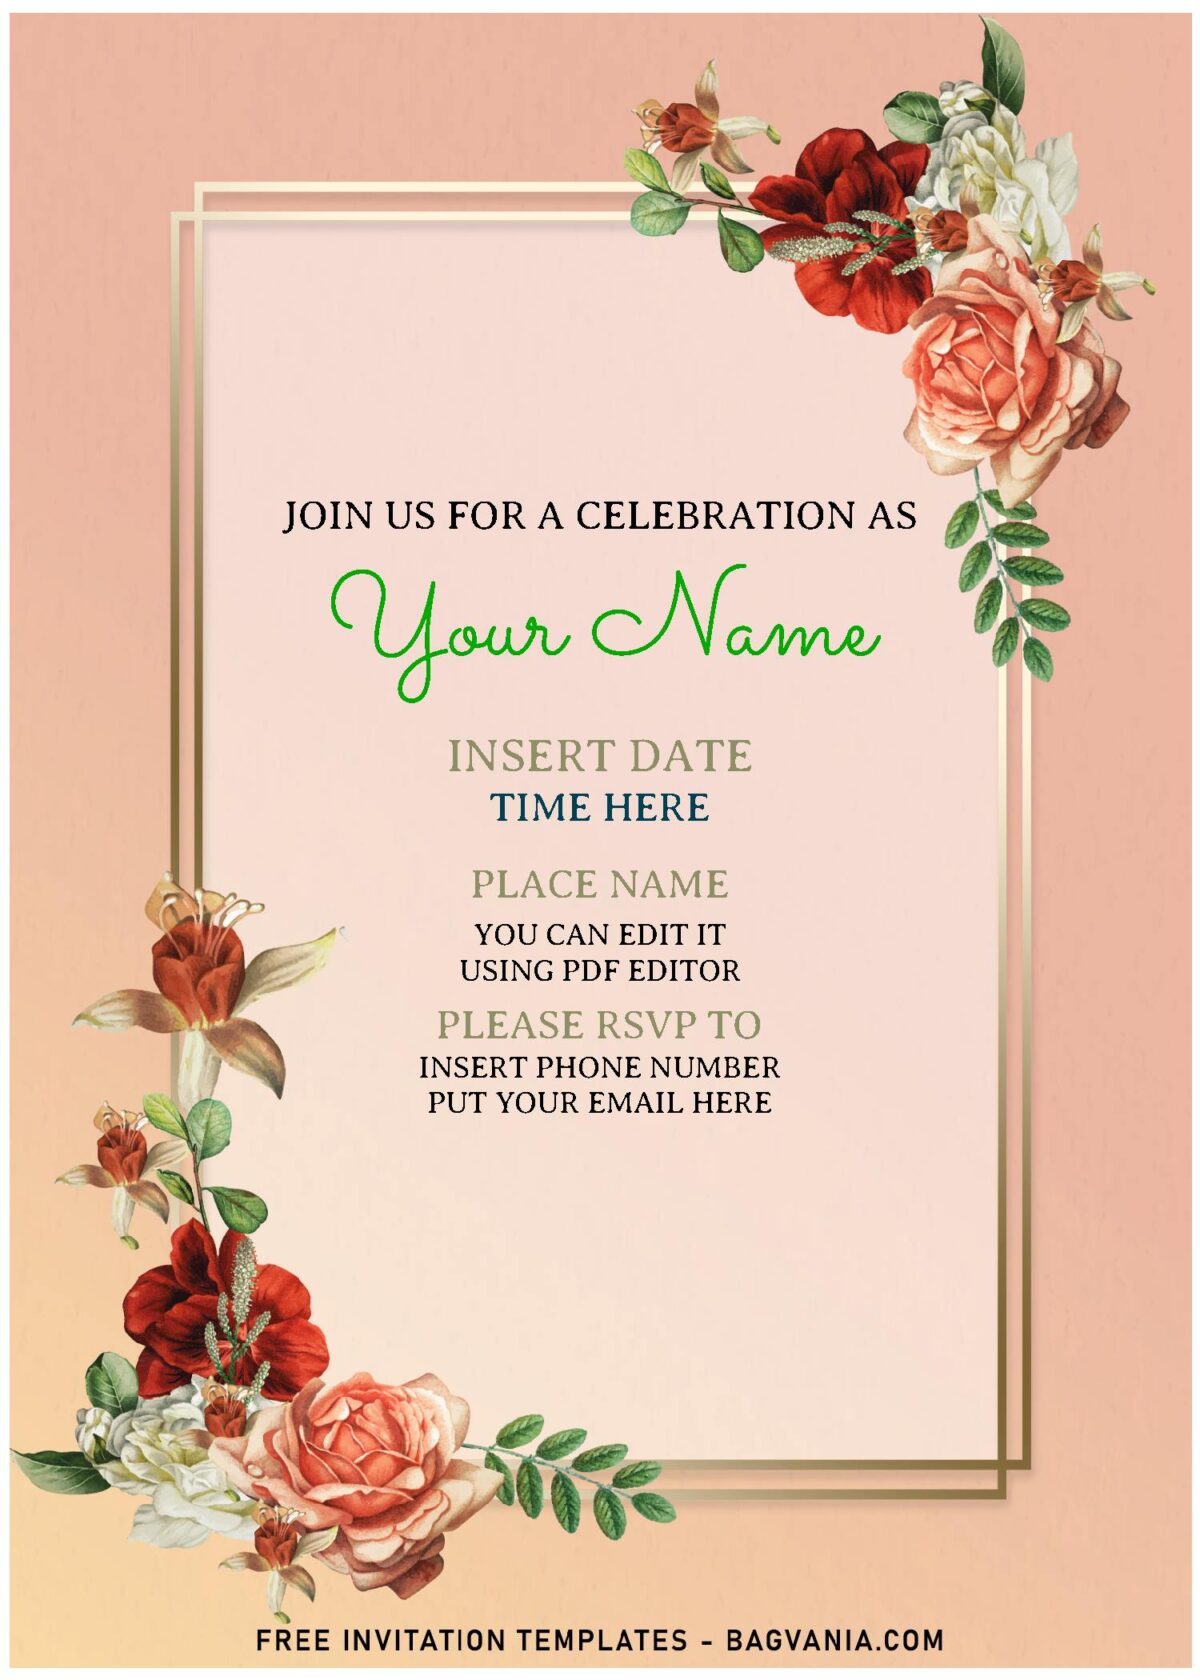 (Free Editable PDF) Rustic Watercolor Rose Birthday Invitation Templates with floral vines